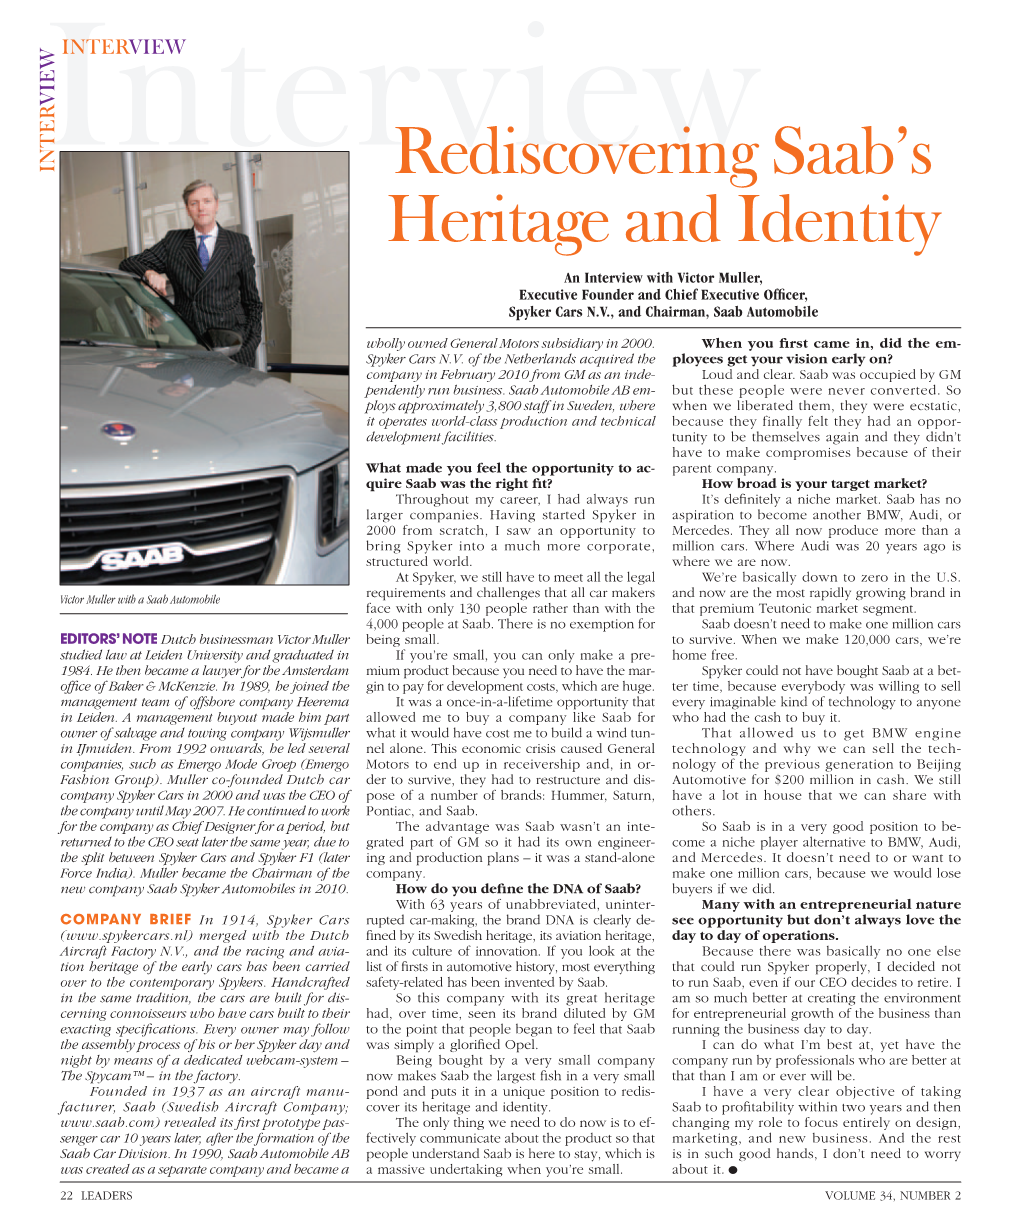 Rediscovering Saab's Heritage and Identity